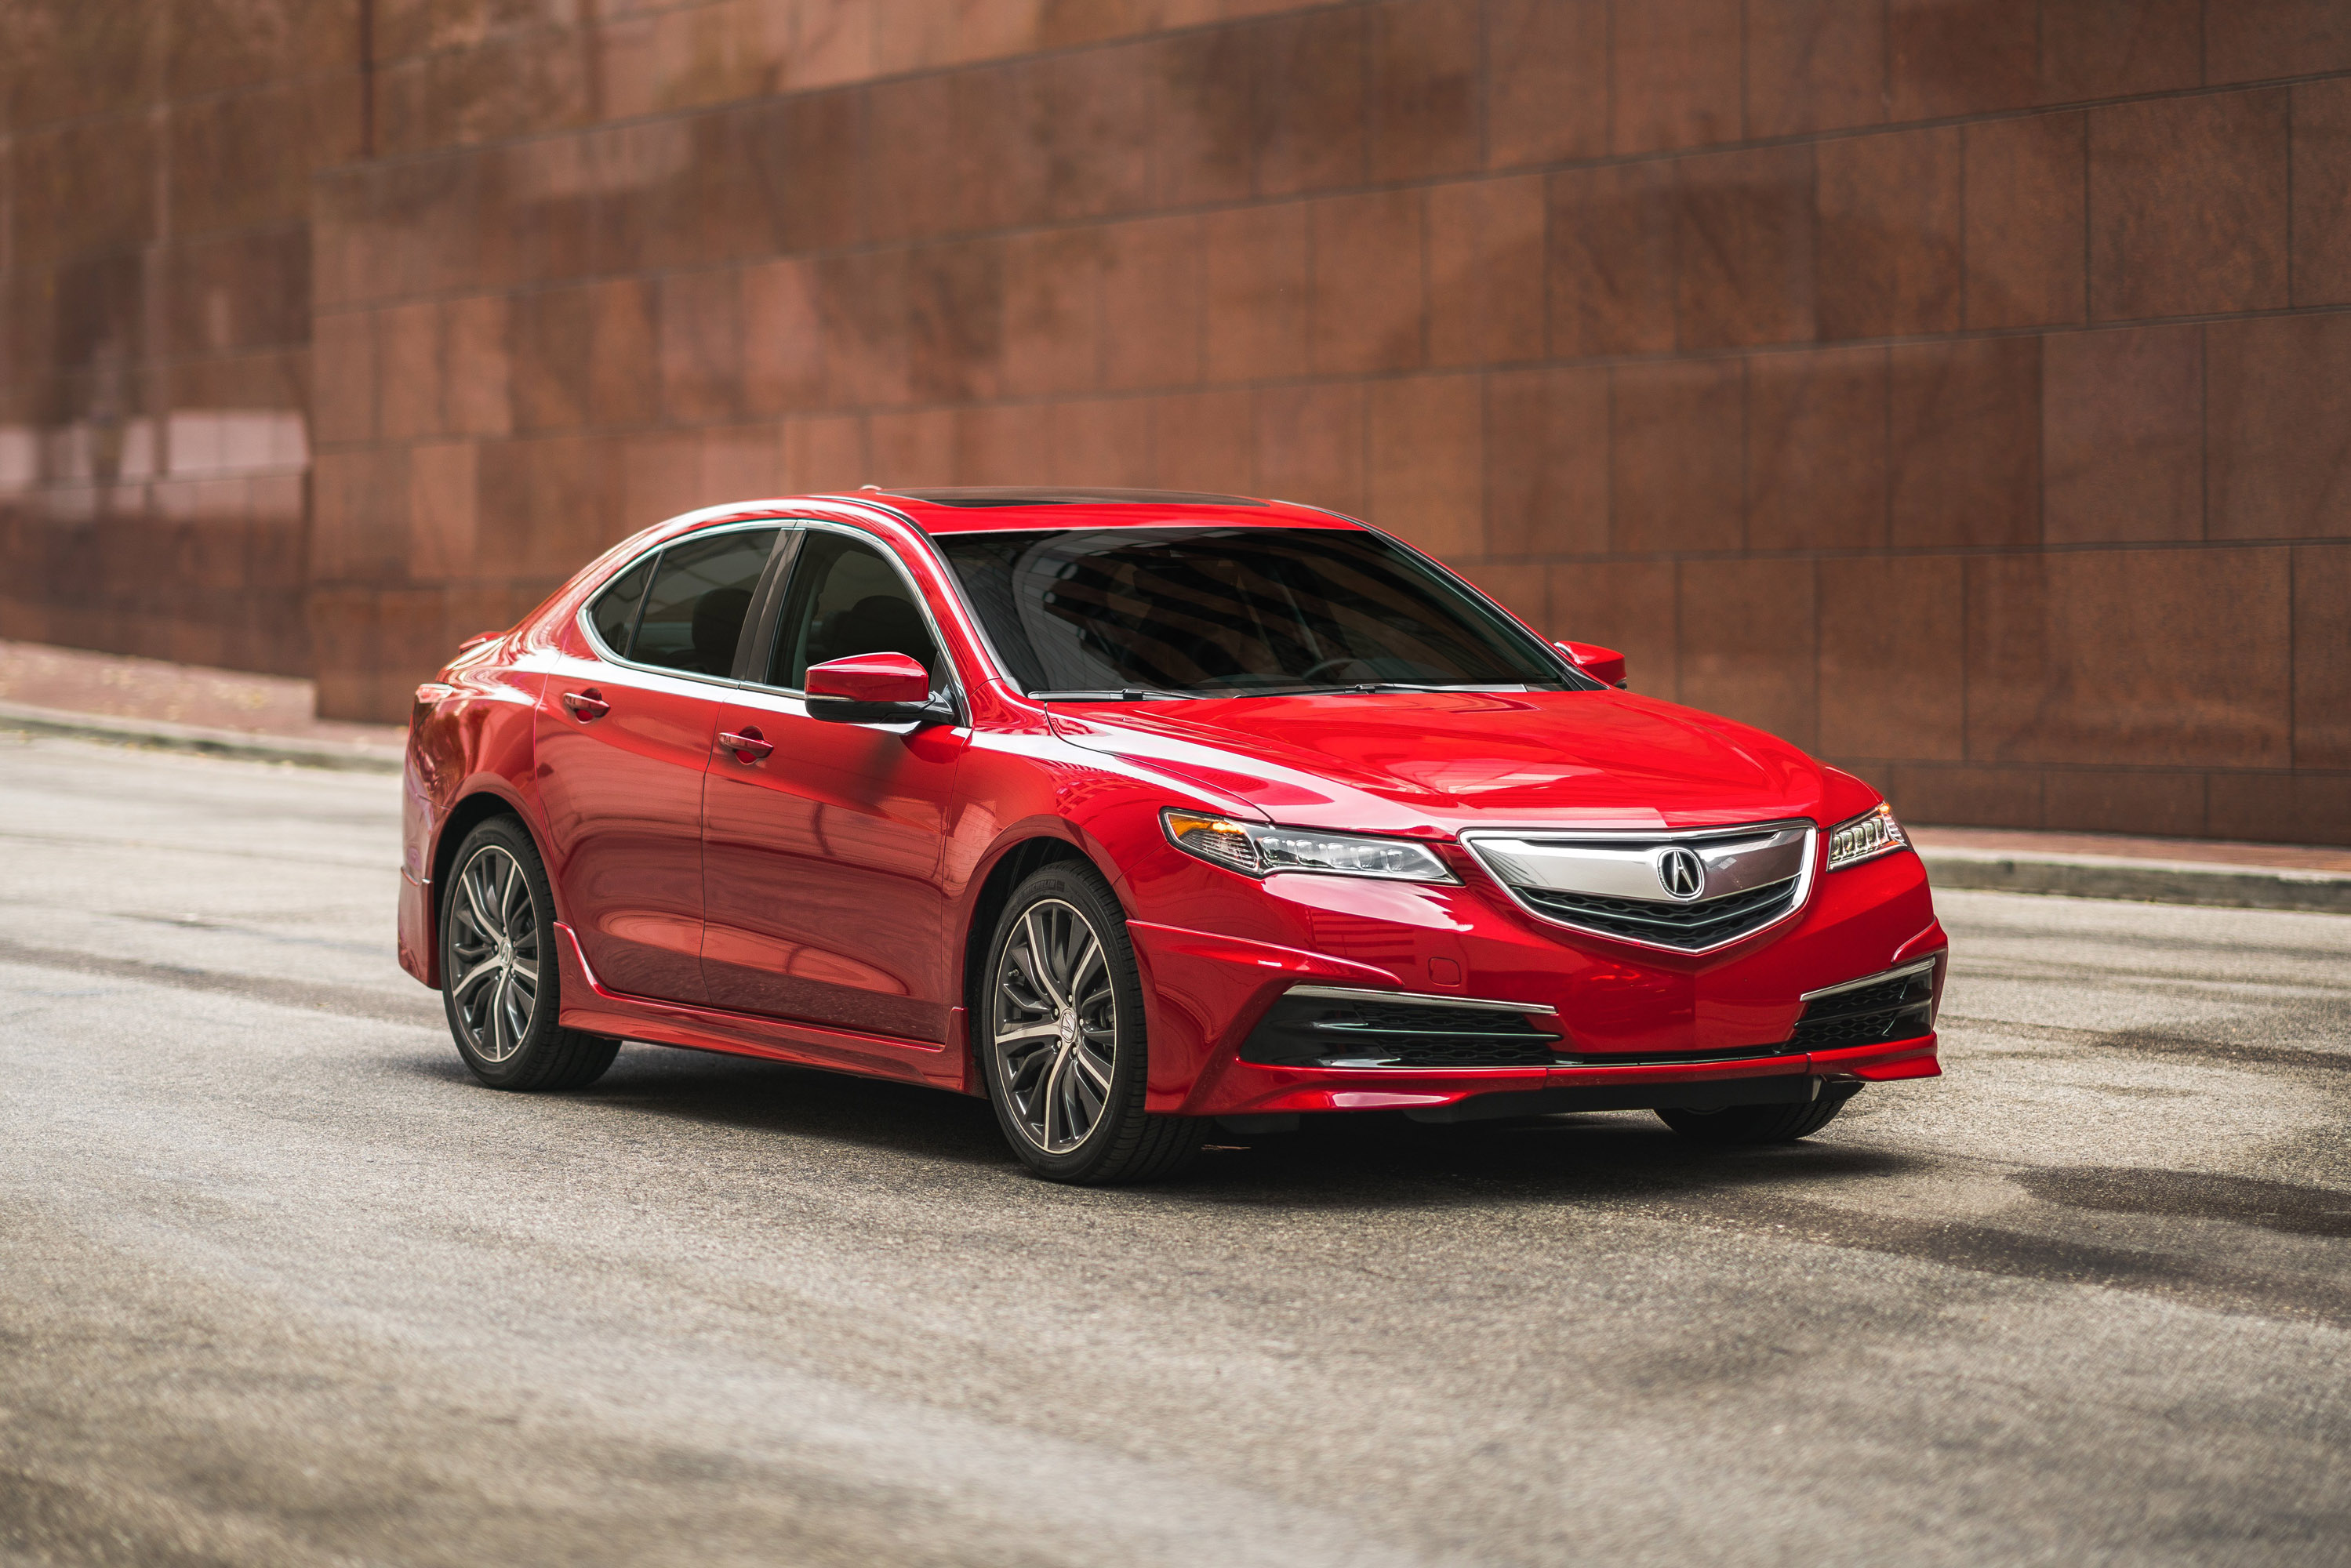 Acura upgrades TLX with a special Performance upgrade